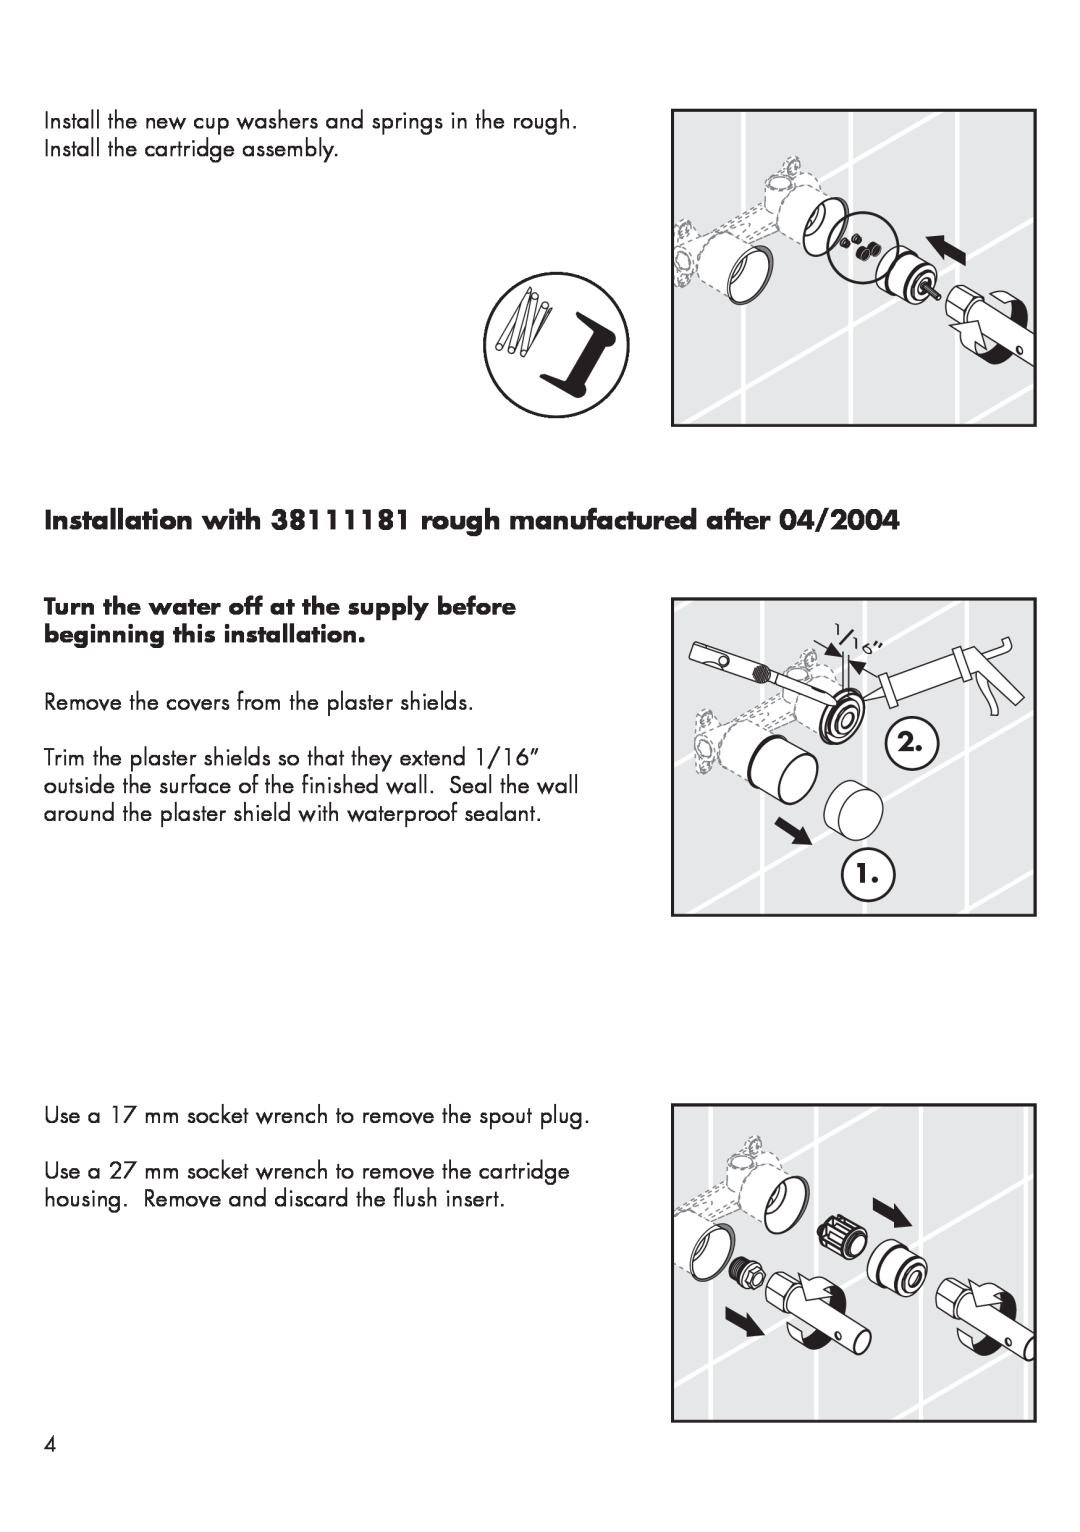 Hans Grohe 35116801, 35115801 Install the cartridge assembly, Remove the covers from the plaster shields 